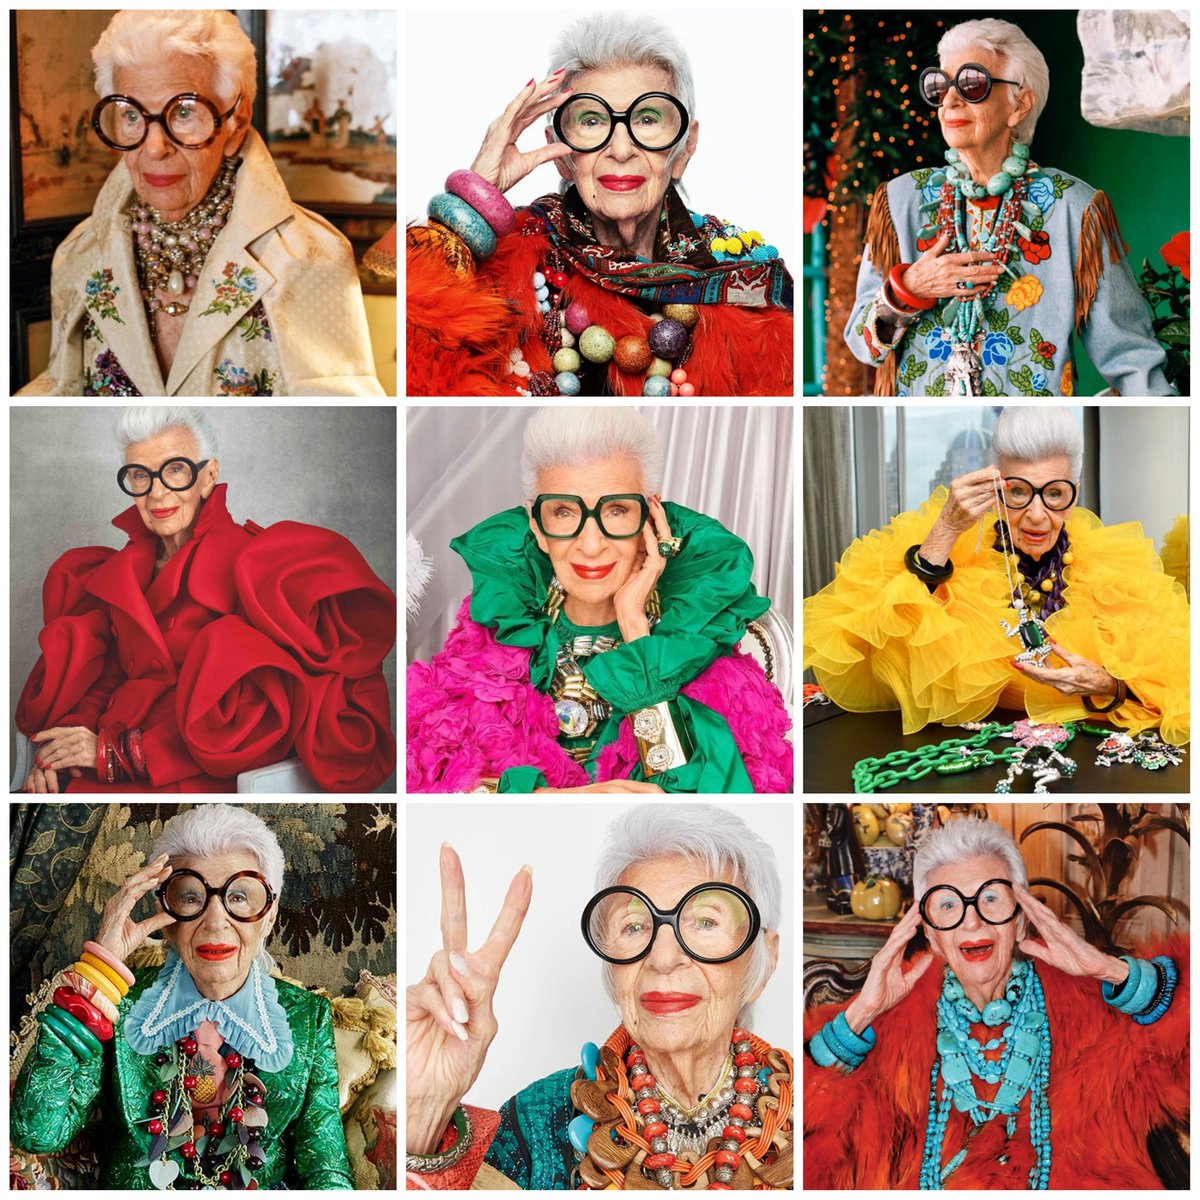 'When you don't dress like everybody else, you don't have to think like everybody else'
RIP #IrisApfel